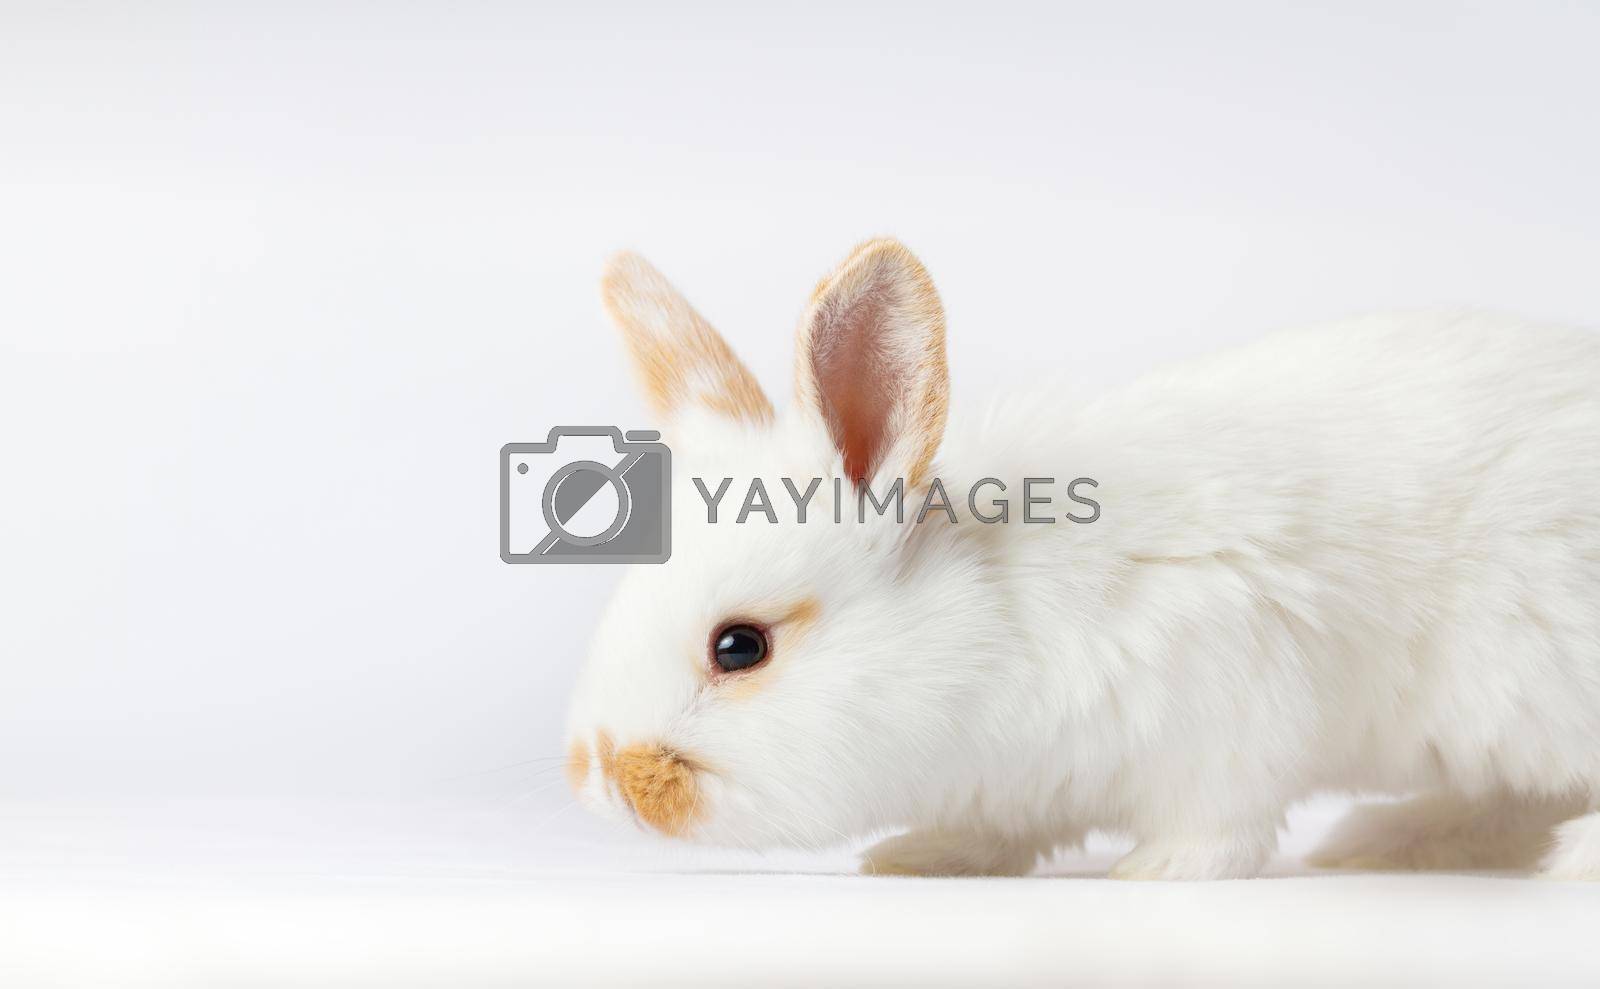 Royalty free image of beautiful easter bunny on white background by drakuliren